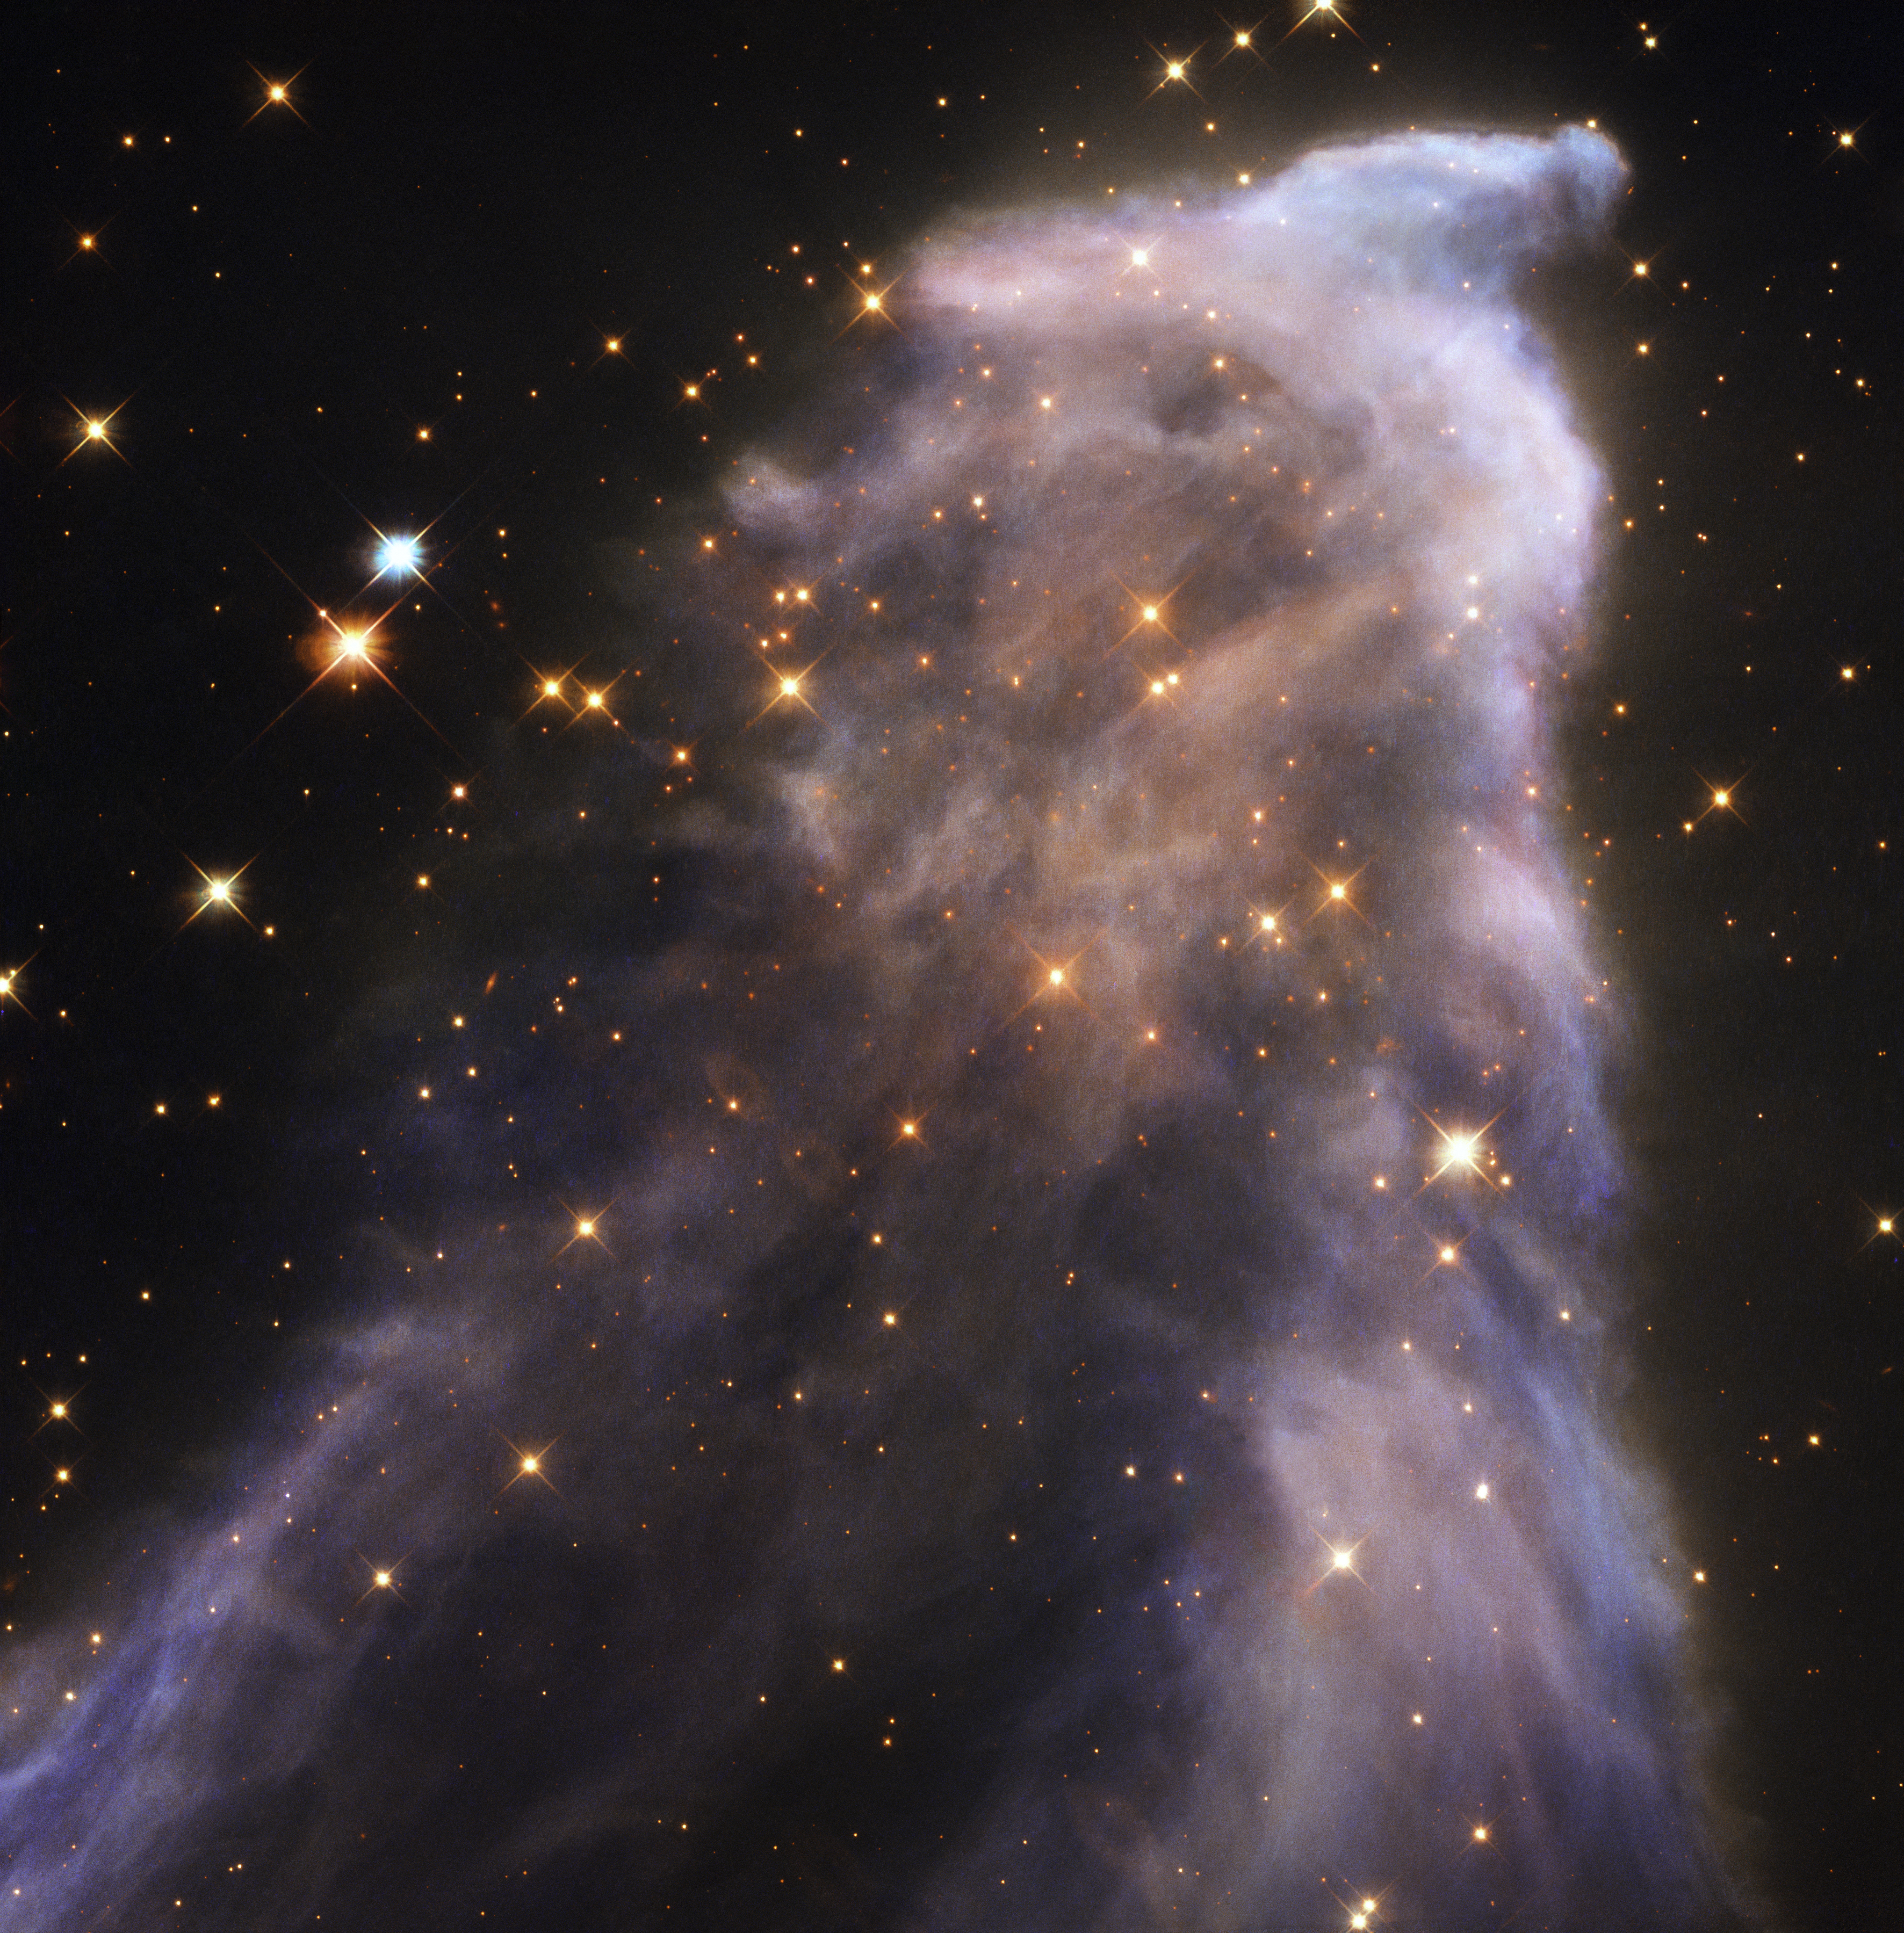 Large purple cloud of dust and gas. Within it there are many orange stars. The image almost appears like a man standing in profile.